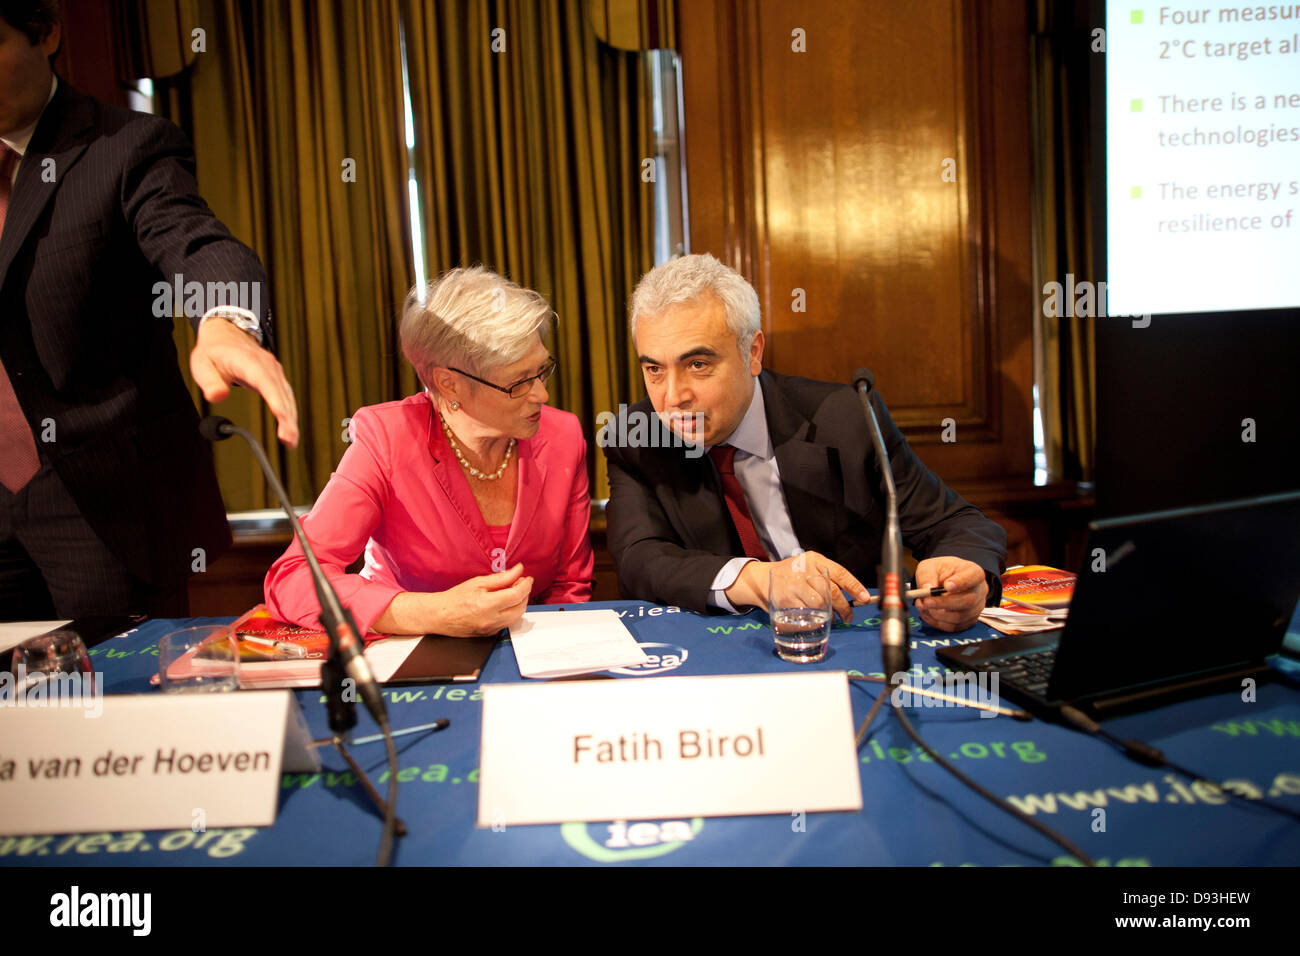 London, UK. 10th June, 2013.  Picture shows Fatih Birol, the Chief Economist and Director of Global Energy Economics with Maria van der Hoeven at the International Energy Agency conference today in London, UK. Credit:  Jeff Gilbert/Alamy Live News Stock Photo